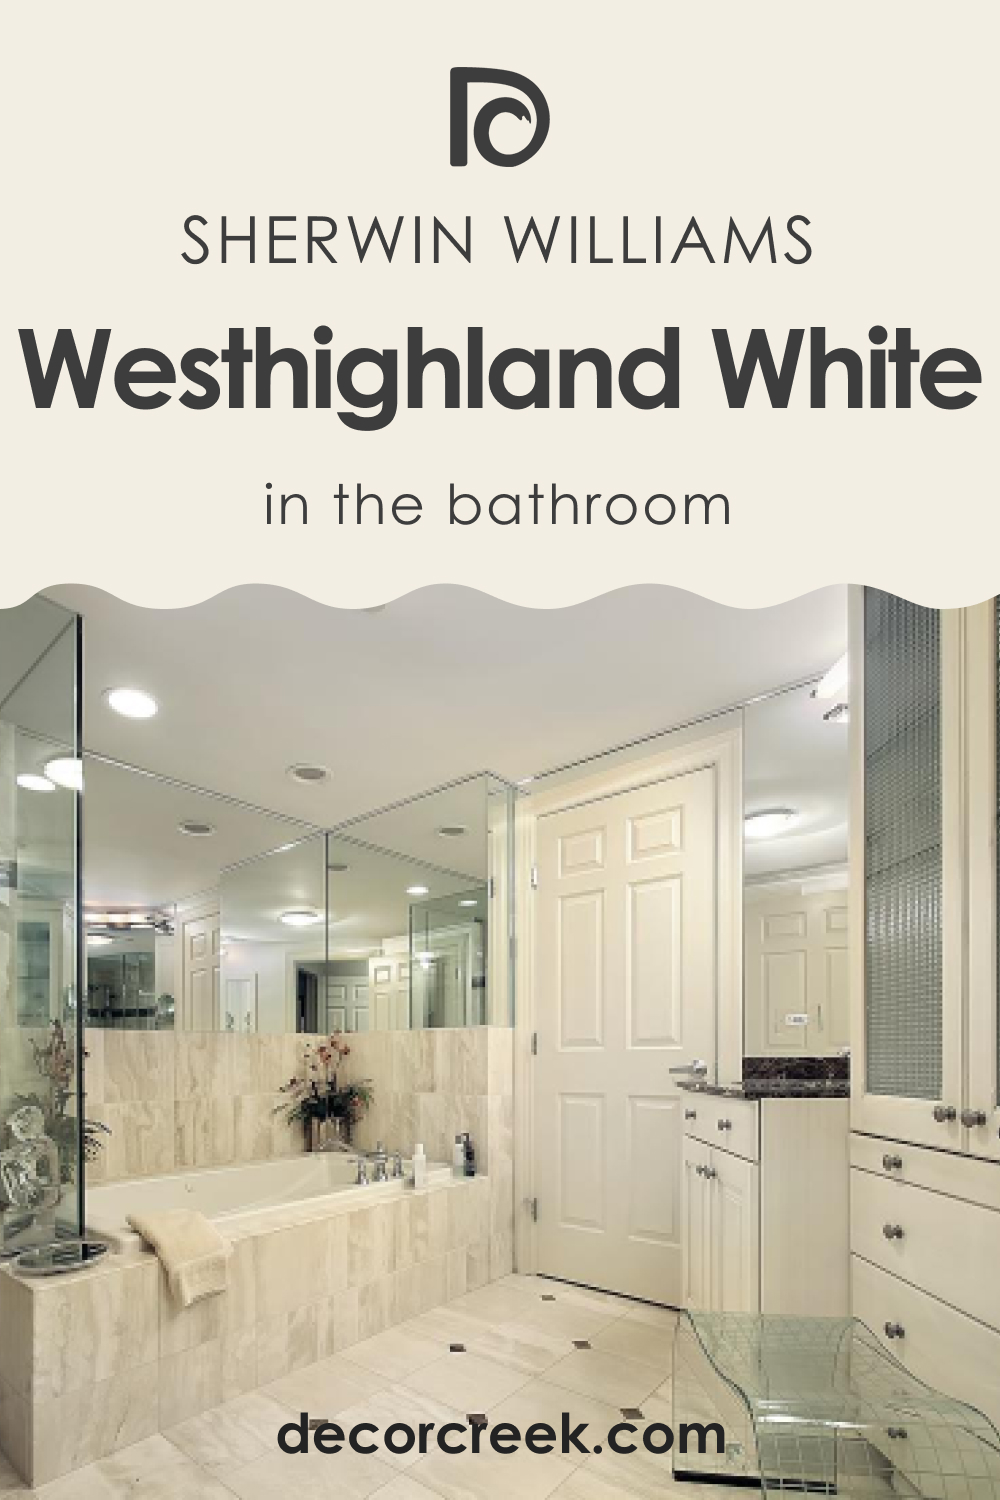 How to Use SW 7566 Westhighland White in the Bathroom?